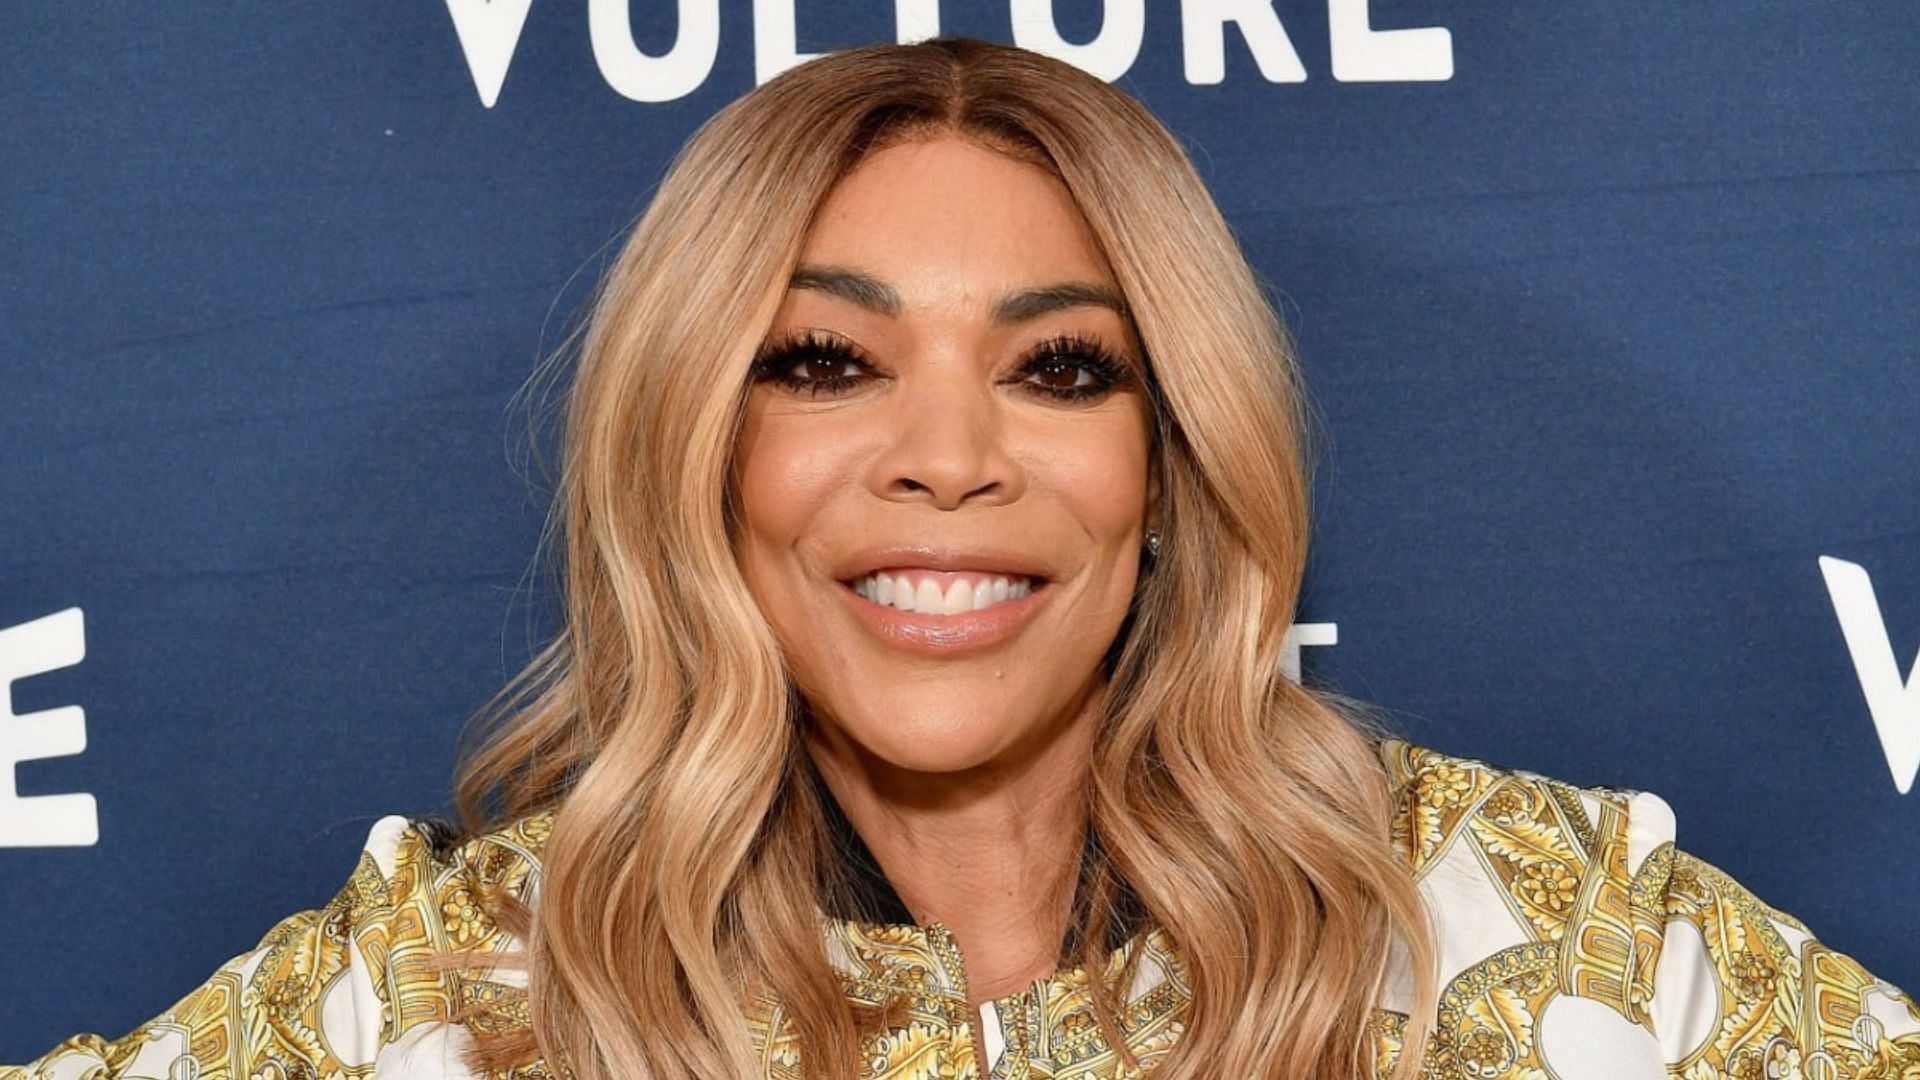 Wendy Williams update: Talk show host opens up on health issues, legal ...